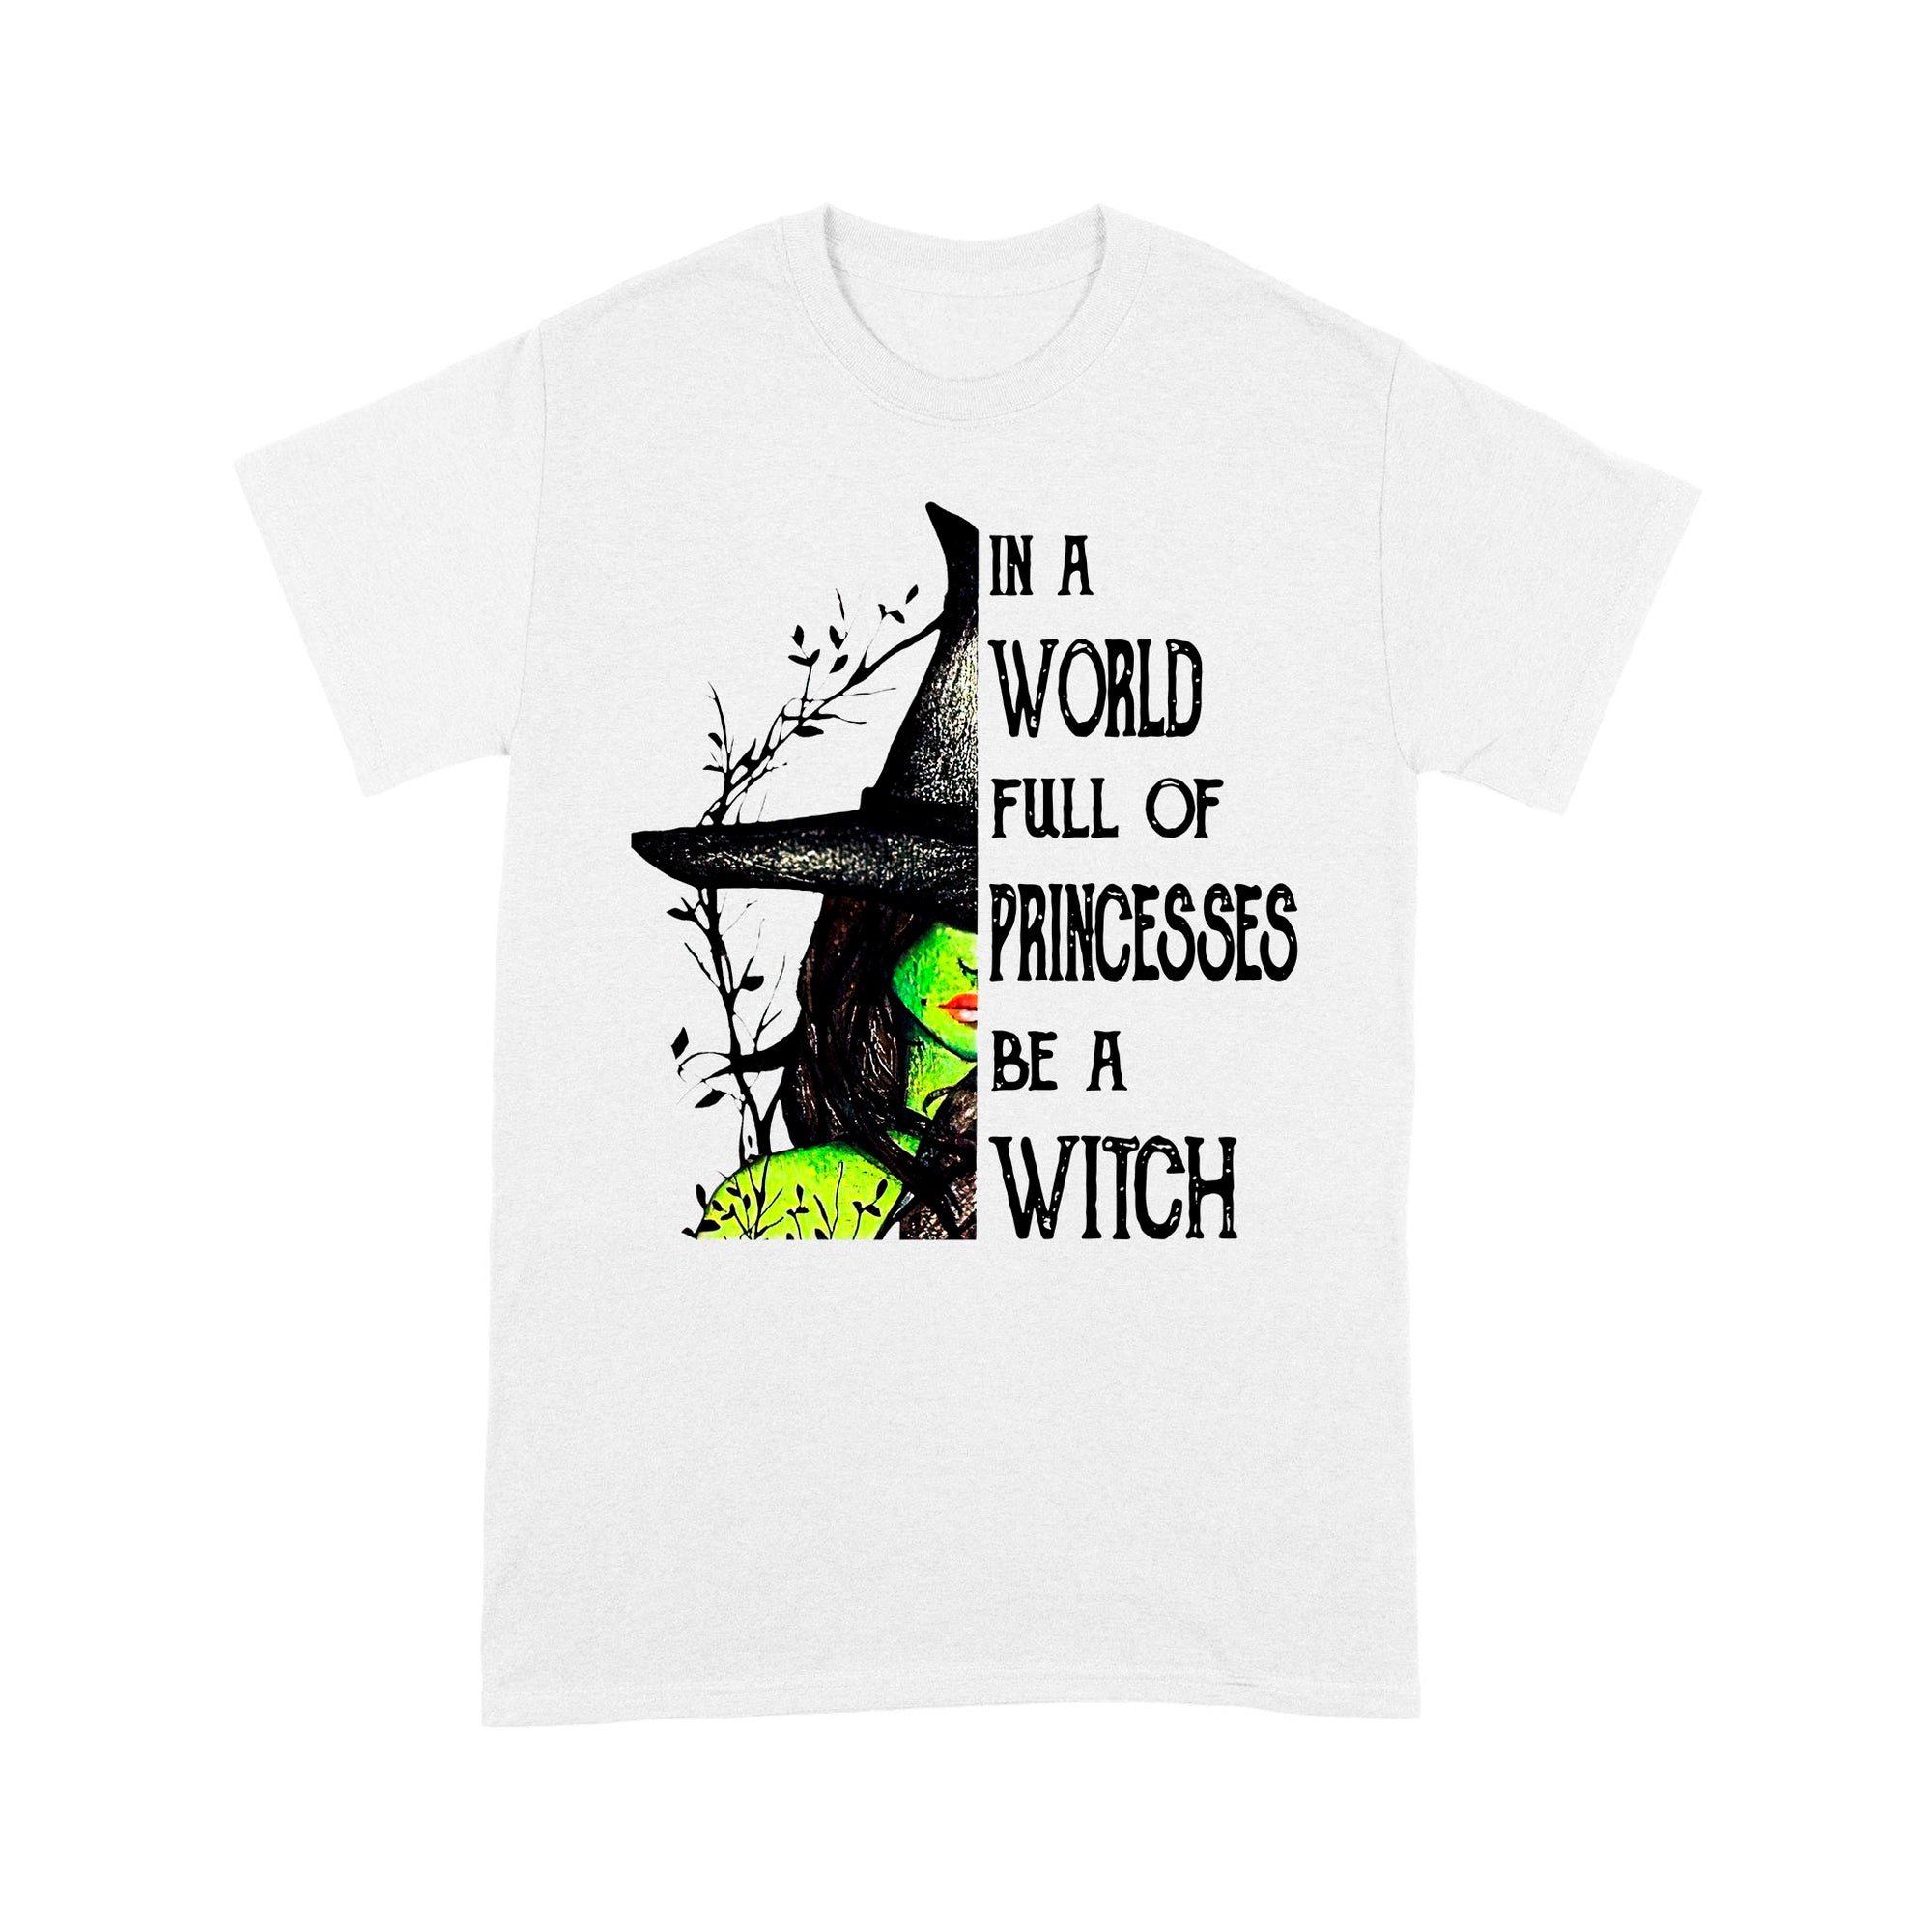 Be A Witch T shirt DL - Wicca Lover Saying T-shirt